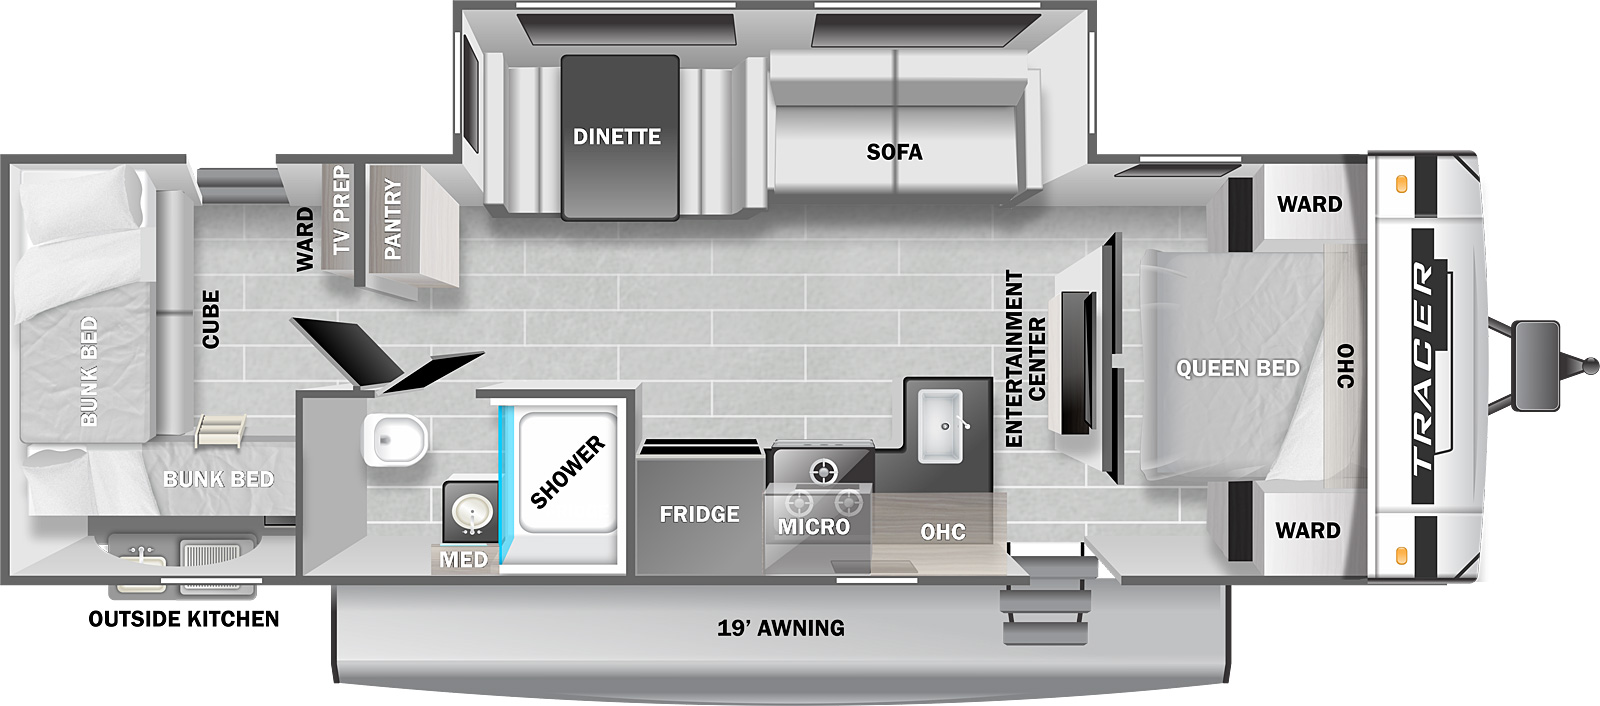 Tracer 29QBD floorplan. The 29QBD has one slide out and one entry door.